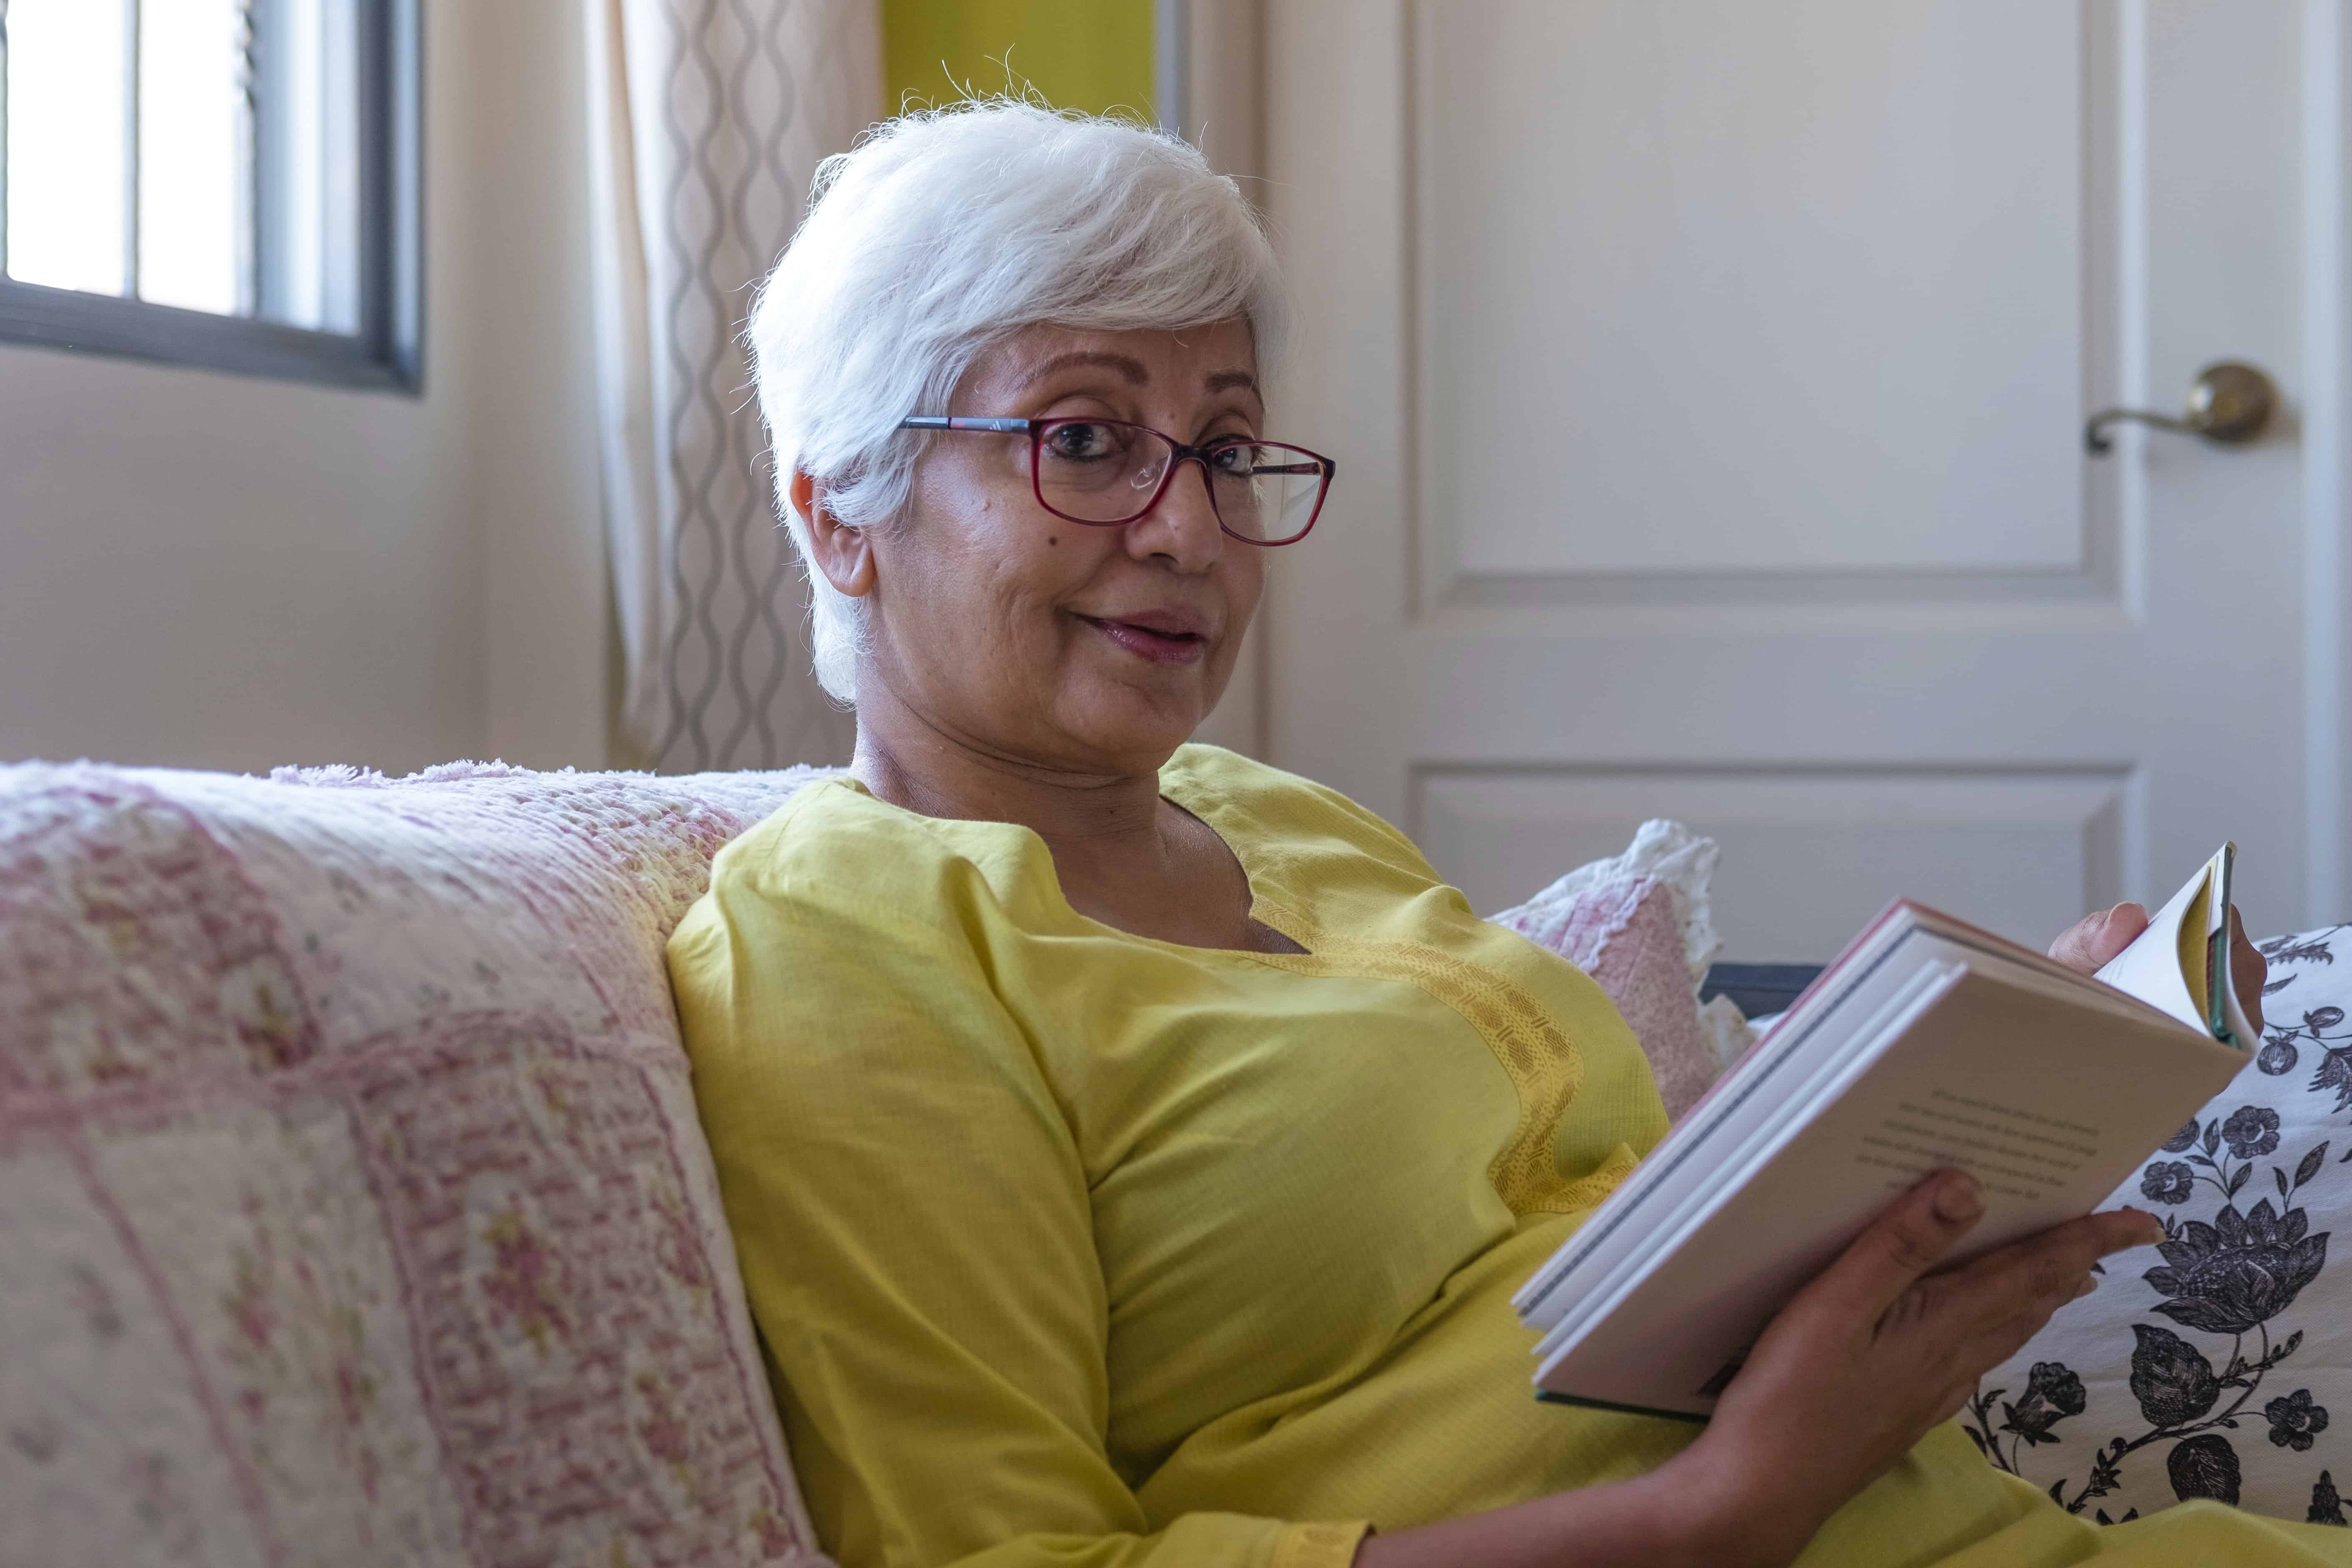 An older woman holding a book, She is sitting on a sofa, wearing a yellow long-sleeved t shirt while looking into the camera. The image is used to represent a cancer patient who has completed the Cancer Quality of Life Survey.